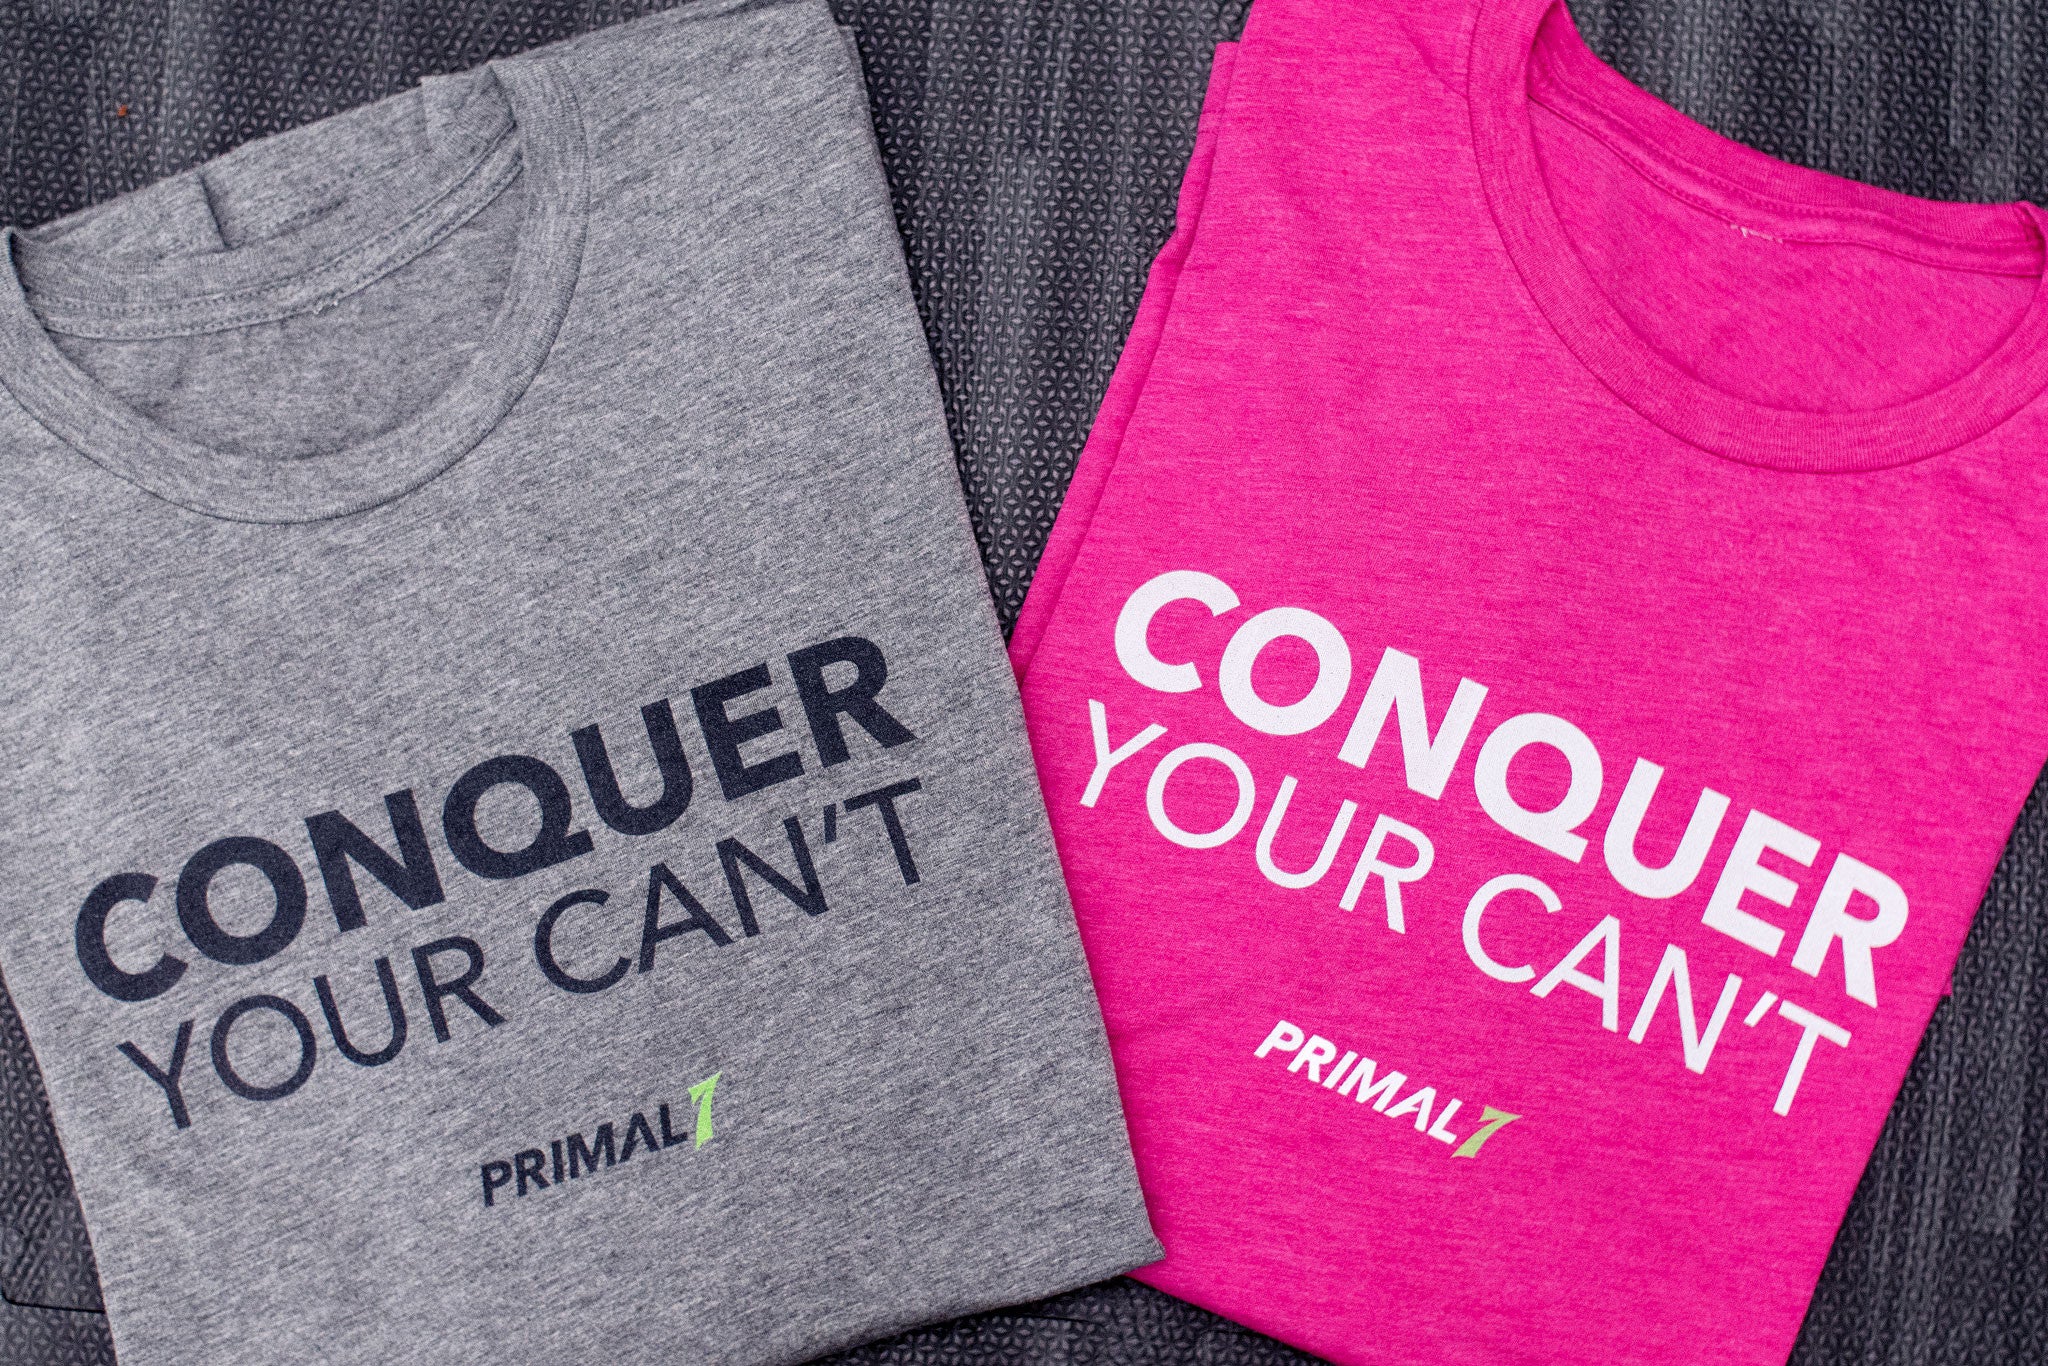 Primal 7 Conquer Your Can't T-Shirt Folded